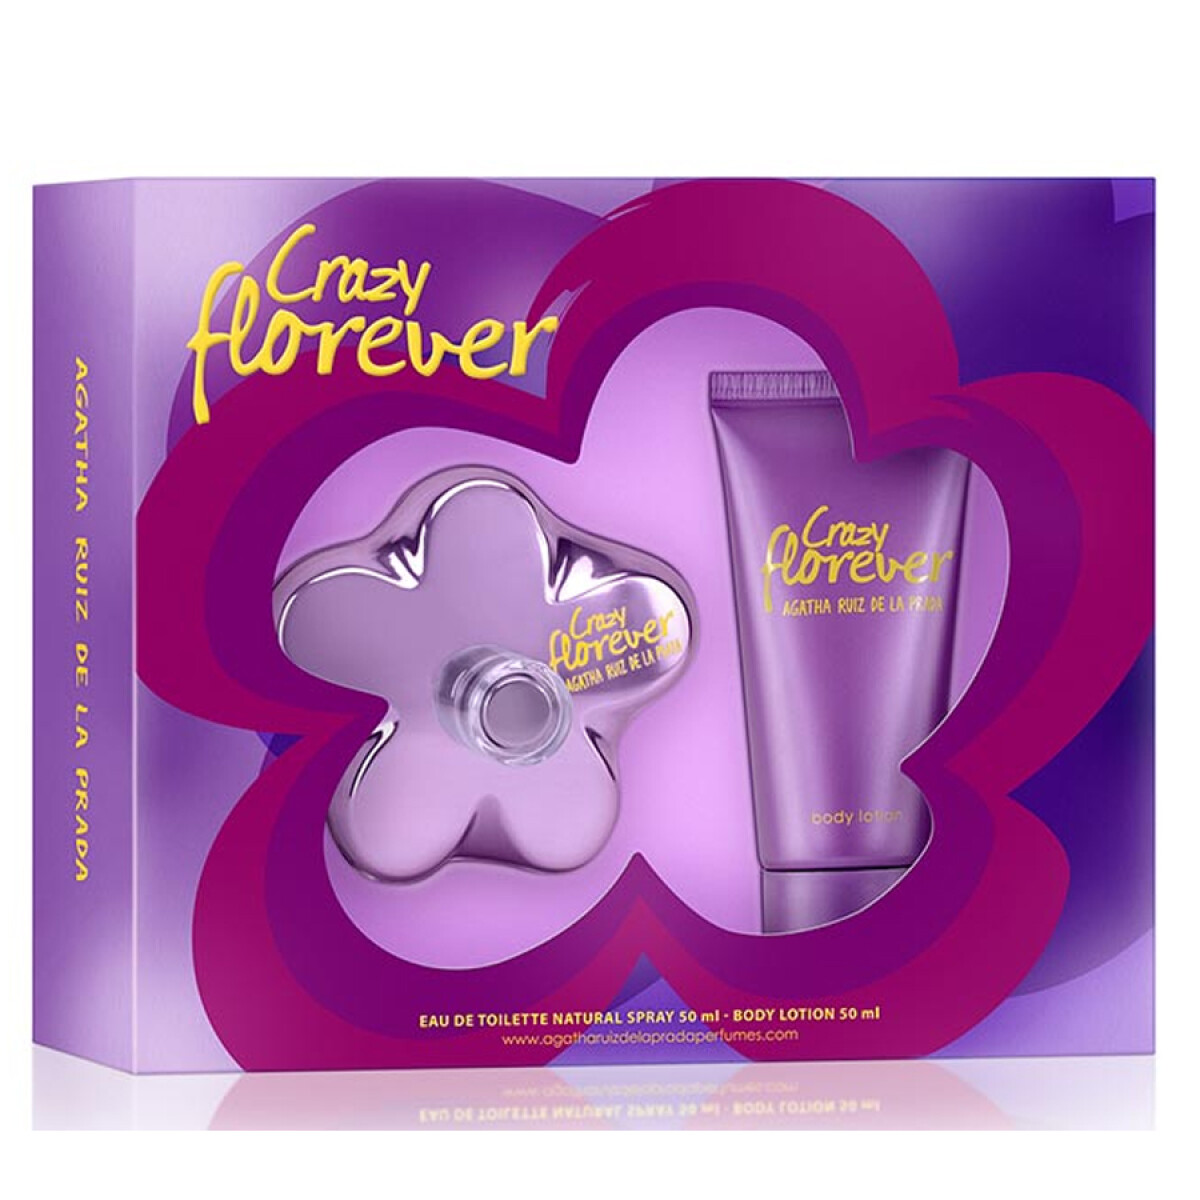 Perfume Mujer Crazy Florever 50 Ml + Body Lotion 50 Ml - 001 